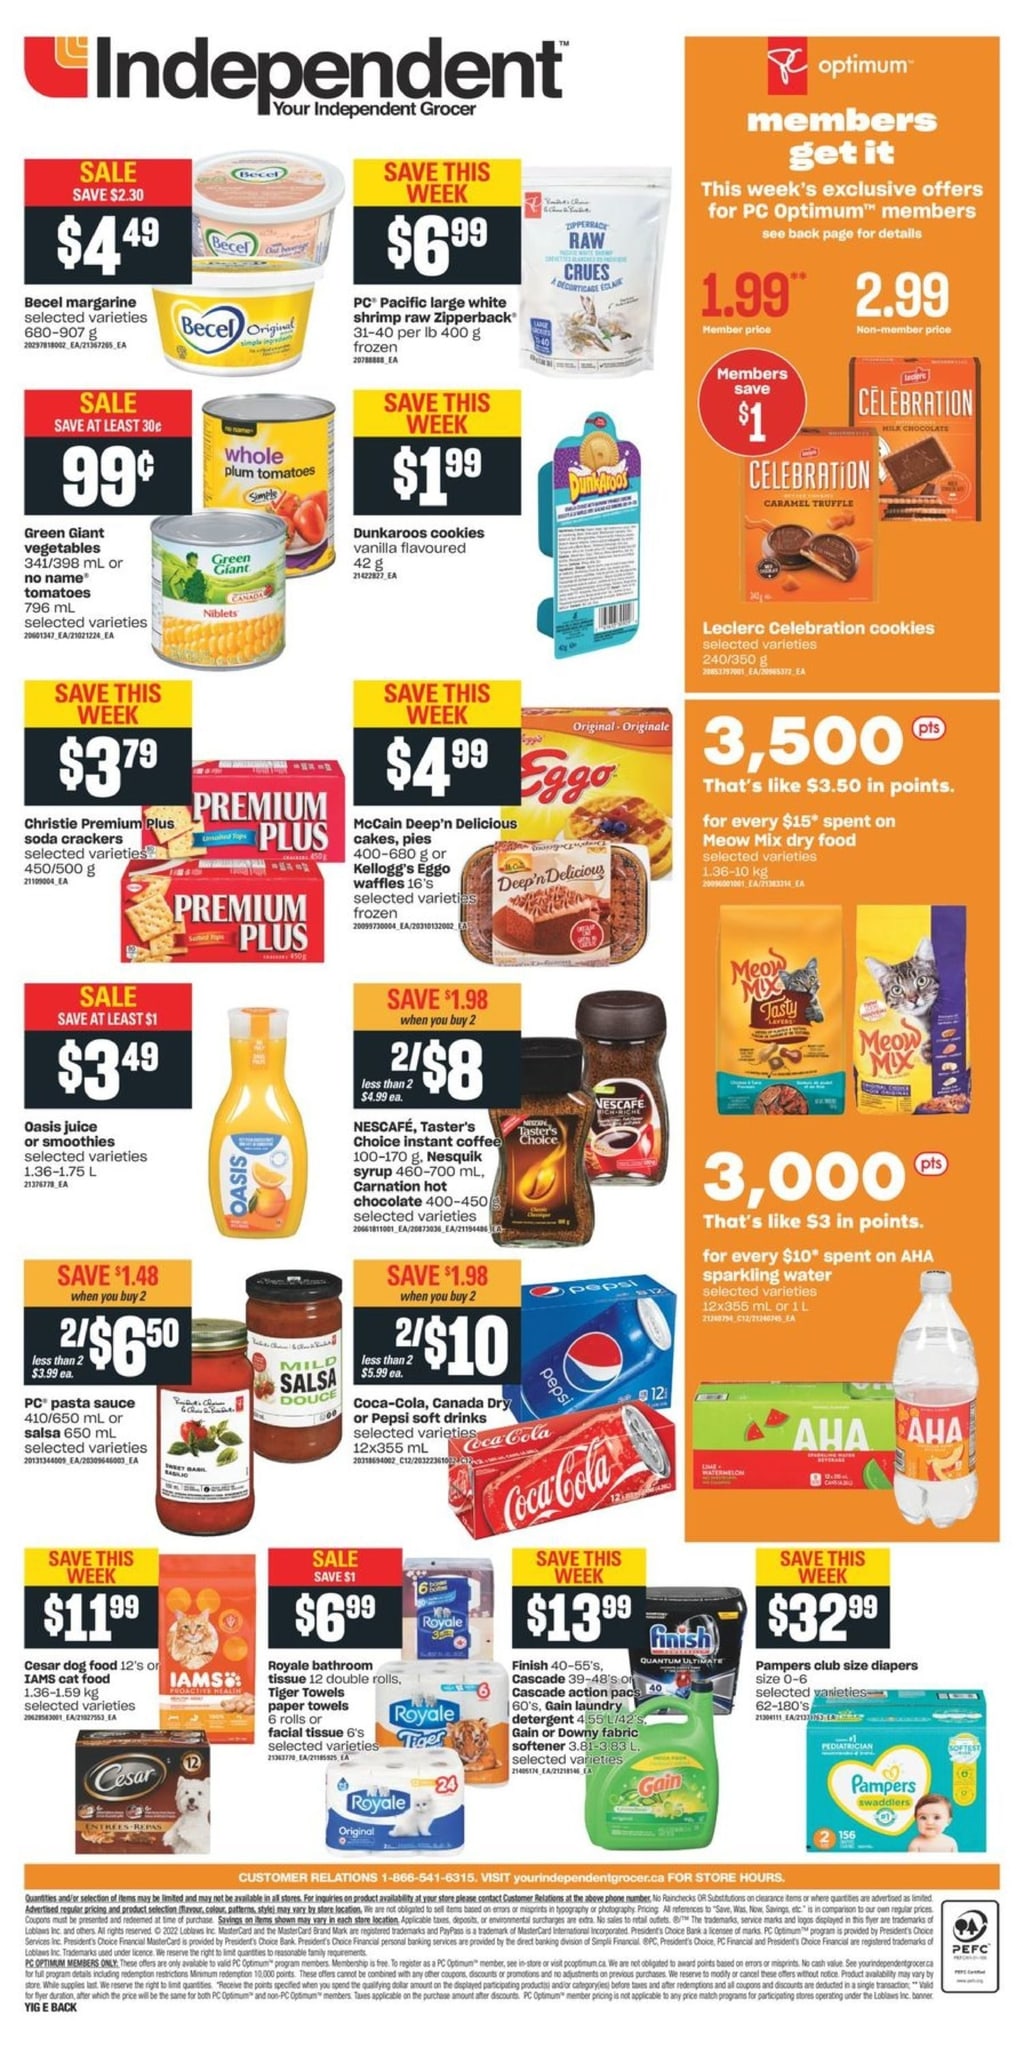 Independent Ontario - Weekly Flyer Specials - Page 2